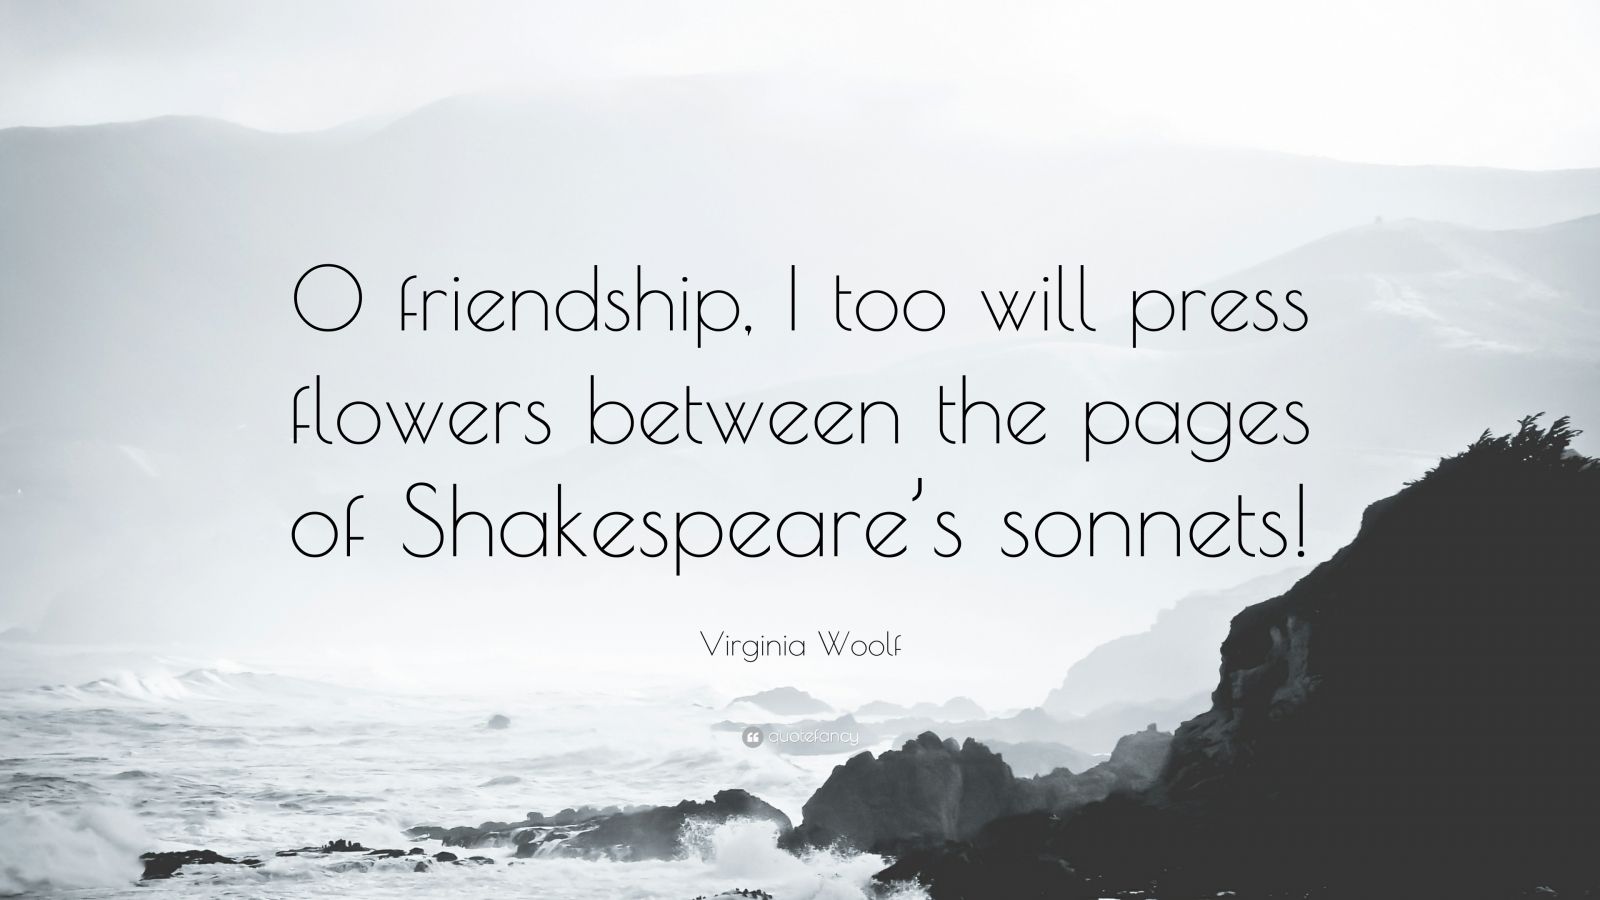 Virginia Woolf Quote: “O friendship, I too will press flowers between